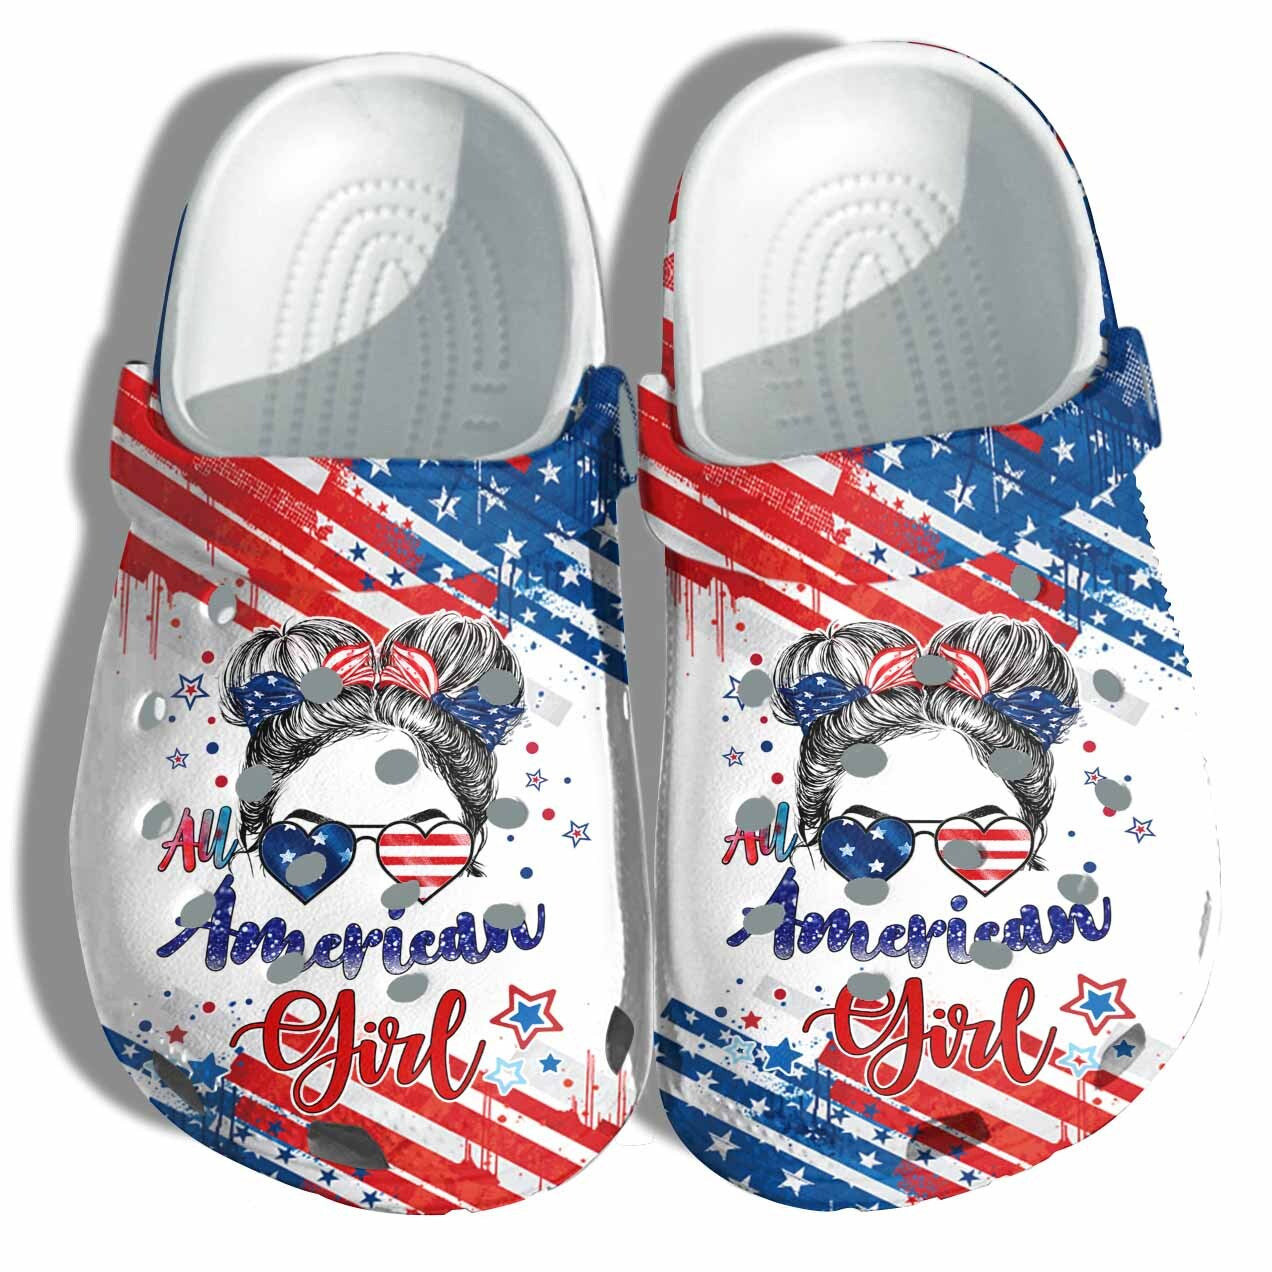 All American Girl America Flag Crocs Clog Shoes Gift Women - Messy Bun Girl Party 4Th Of July Crocs Clog Shoes Birthday Day Gift